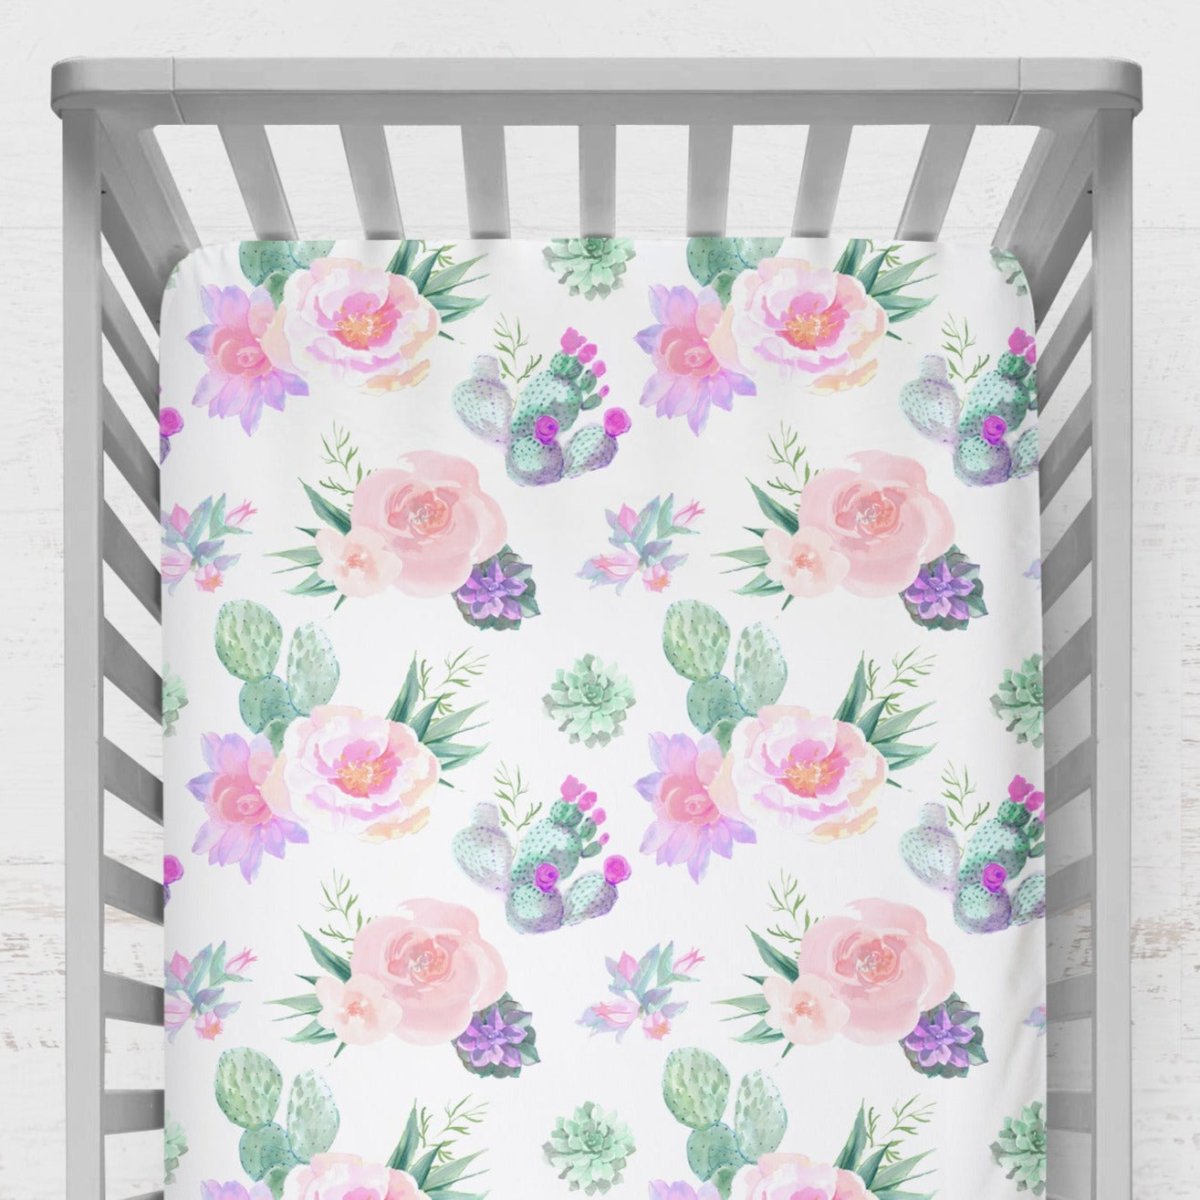 Cactus Floral Nursery Collection - Cactus Floral, gender_girl, text